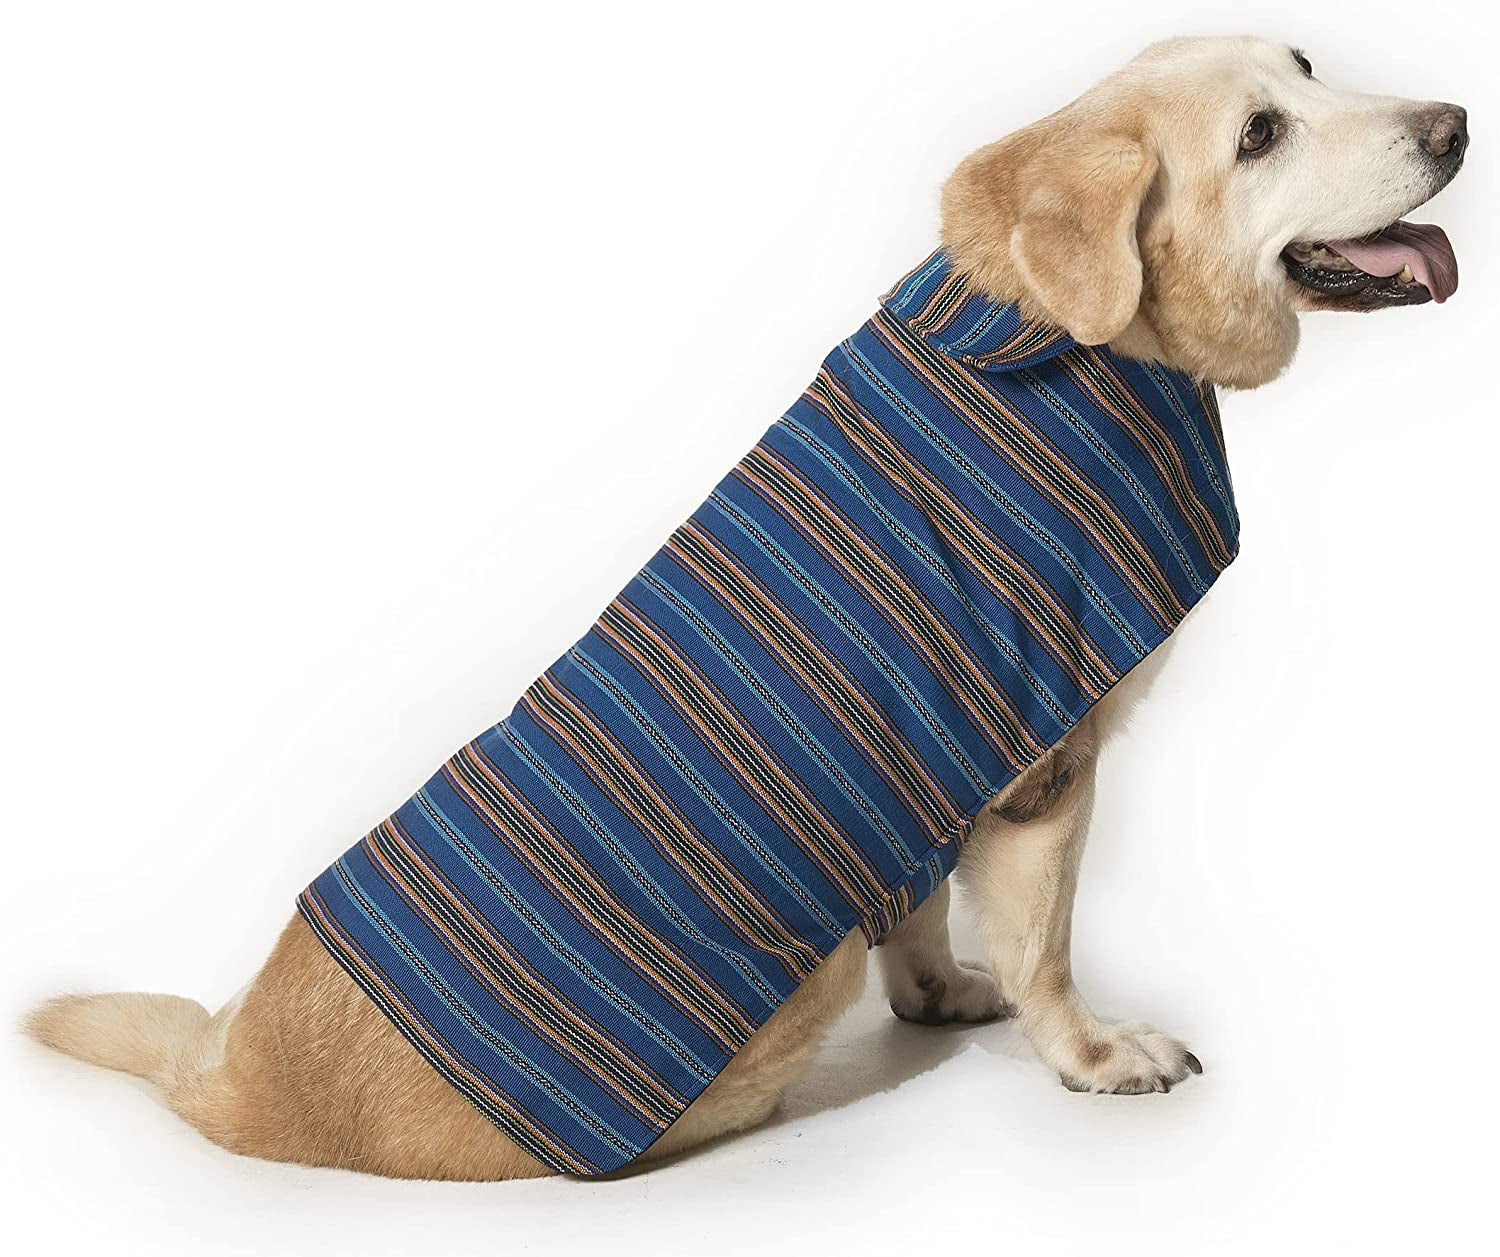 Mayan Dog Clothing for Dogs. Works As, Coat, Sweater, Vest, Jacket, Stress Reliever. for XXS, Small, Medium, Large, XL, XXL Dogs (Any Size) Animals & Pet Supplies > Pet Supplies > Dog Supplies > Dog Apparel Mayan Dog Red Large 